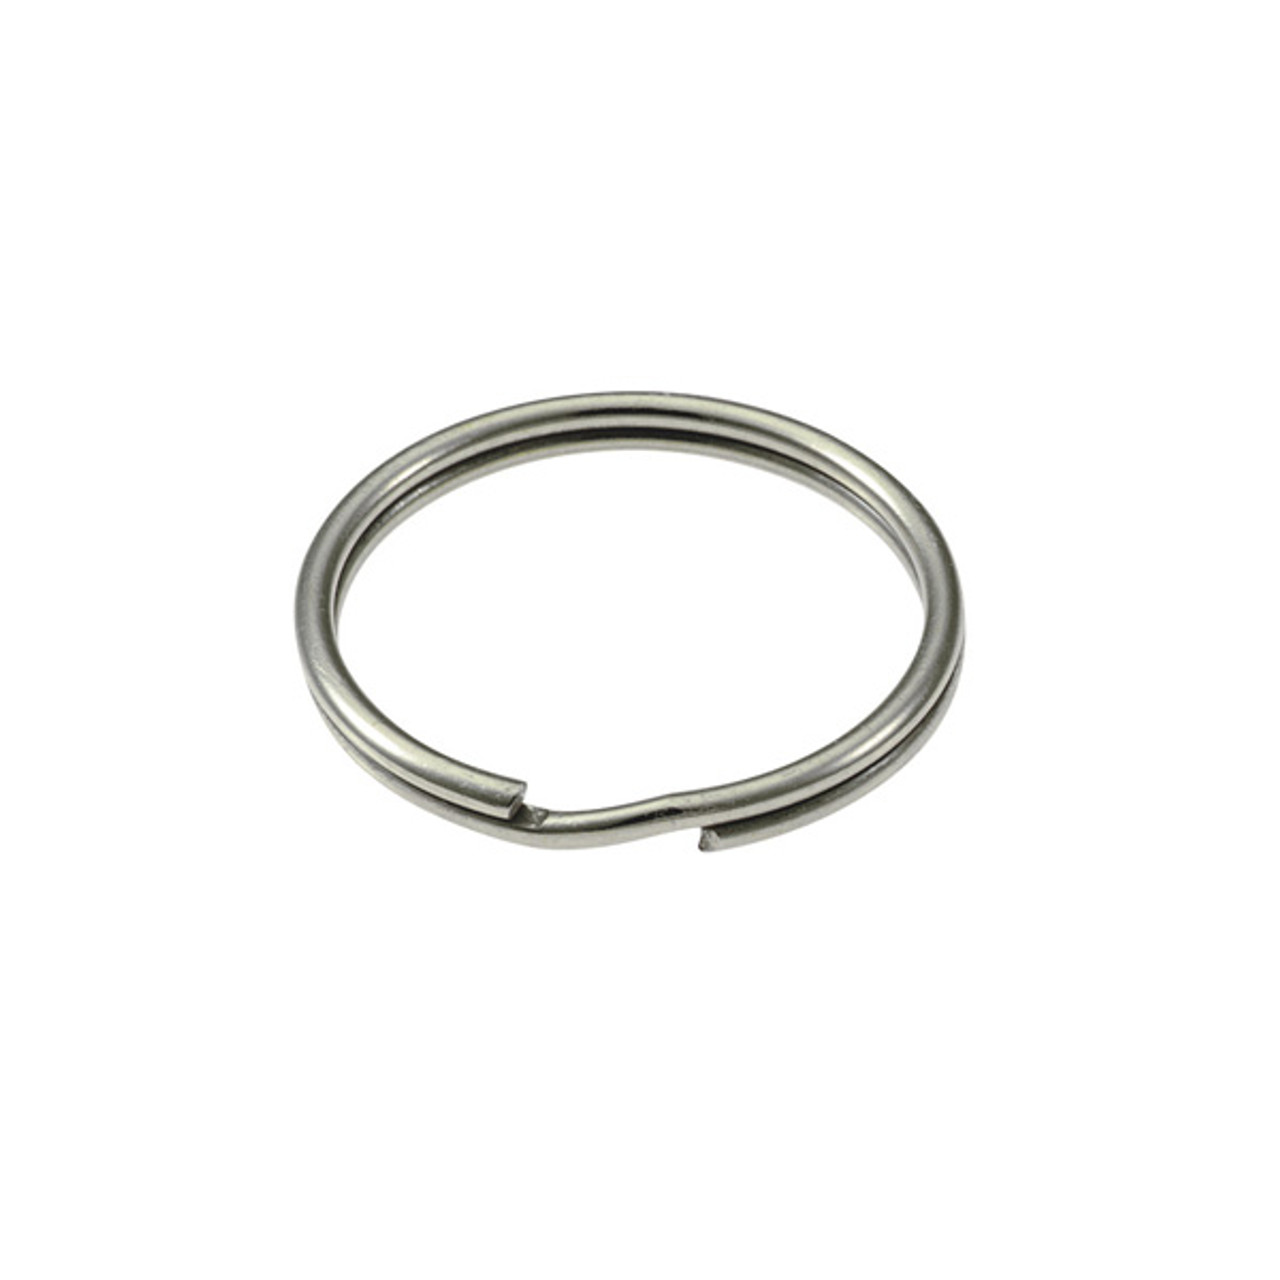 Shop for and Buy Heavy Duty Split Key Ring Nickel Plated 1-1/8 Inch  Diameter (USA) at . Large selection and bulk discounts available.